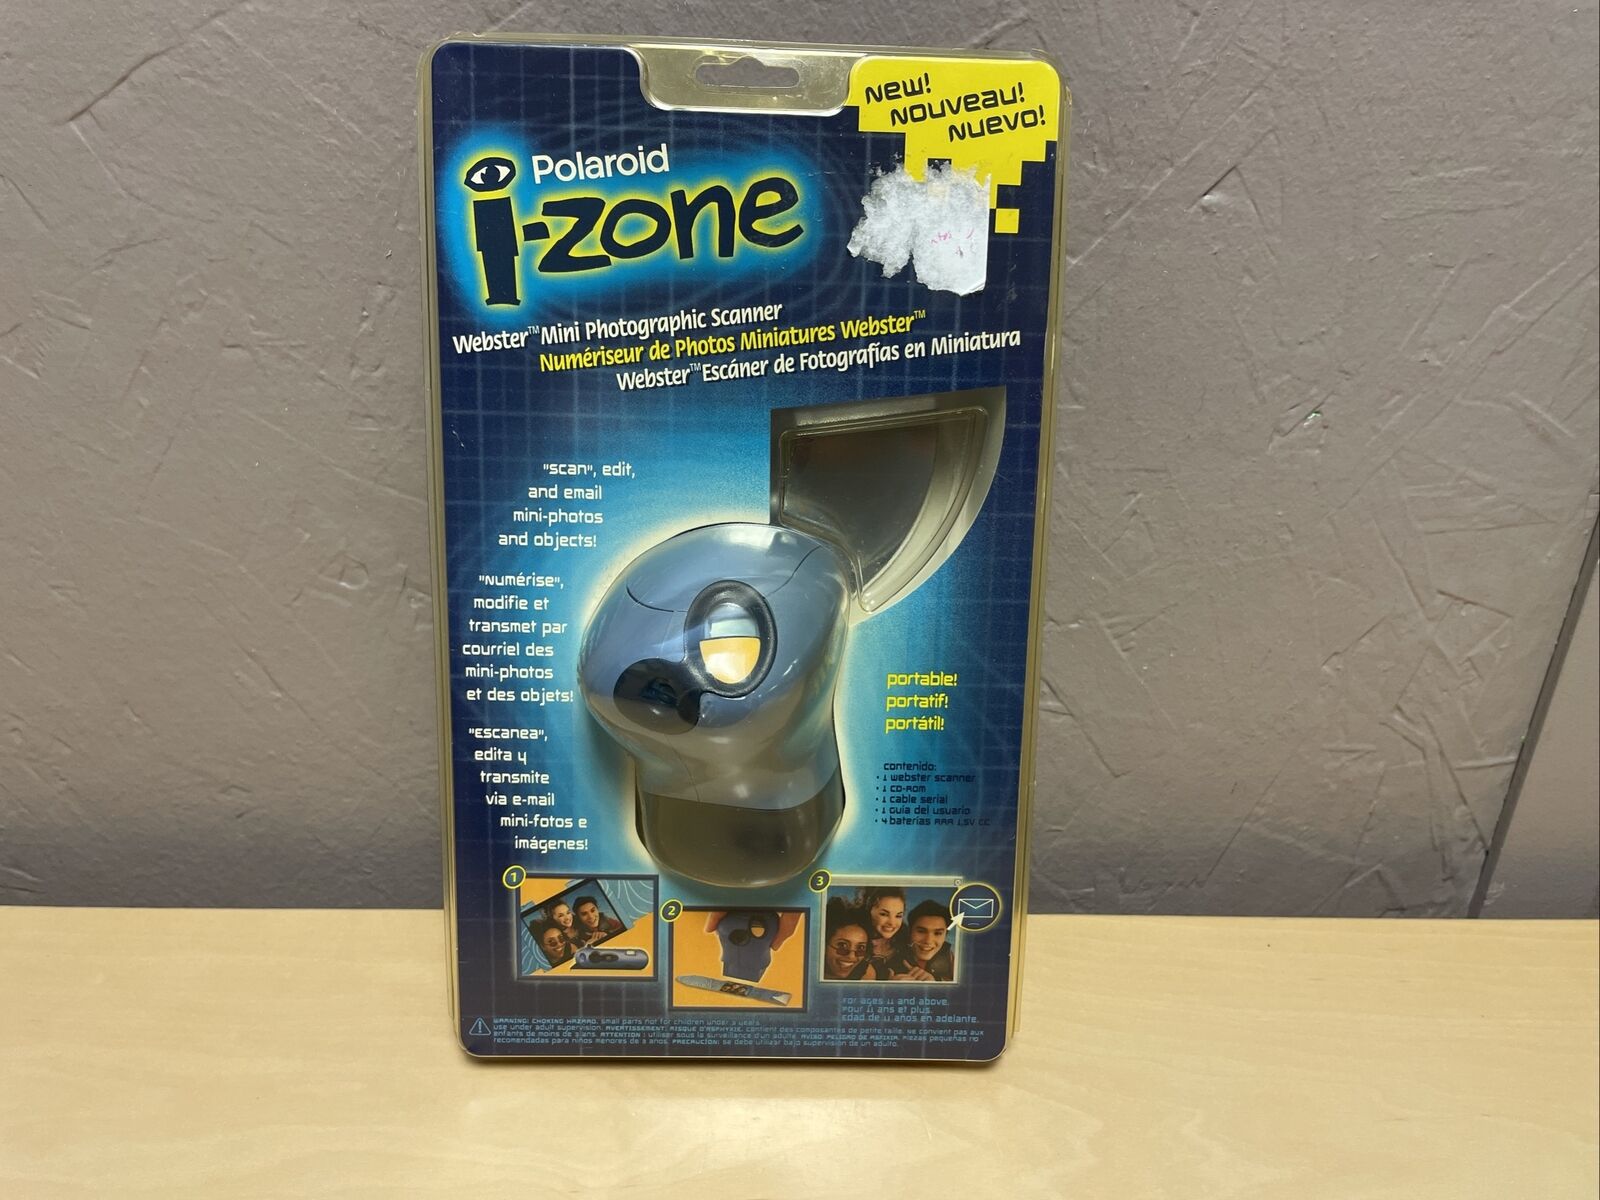 New Polaroid I-Zone Webster Mini Photographic Scanner For Sticker Film Cameras